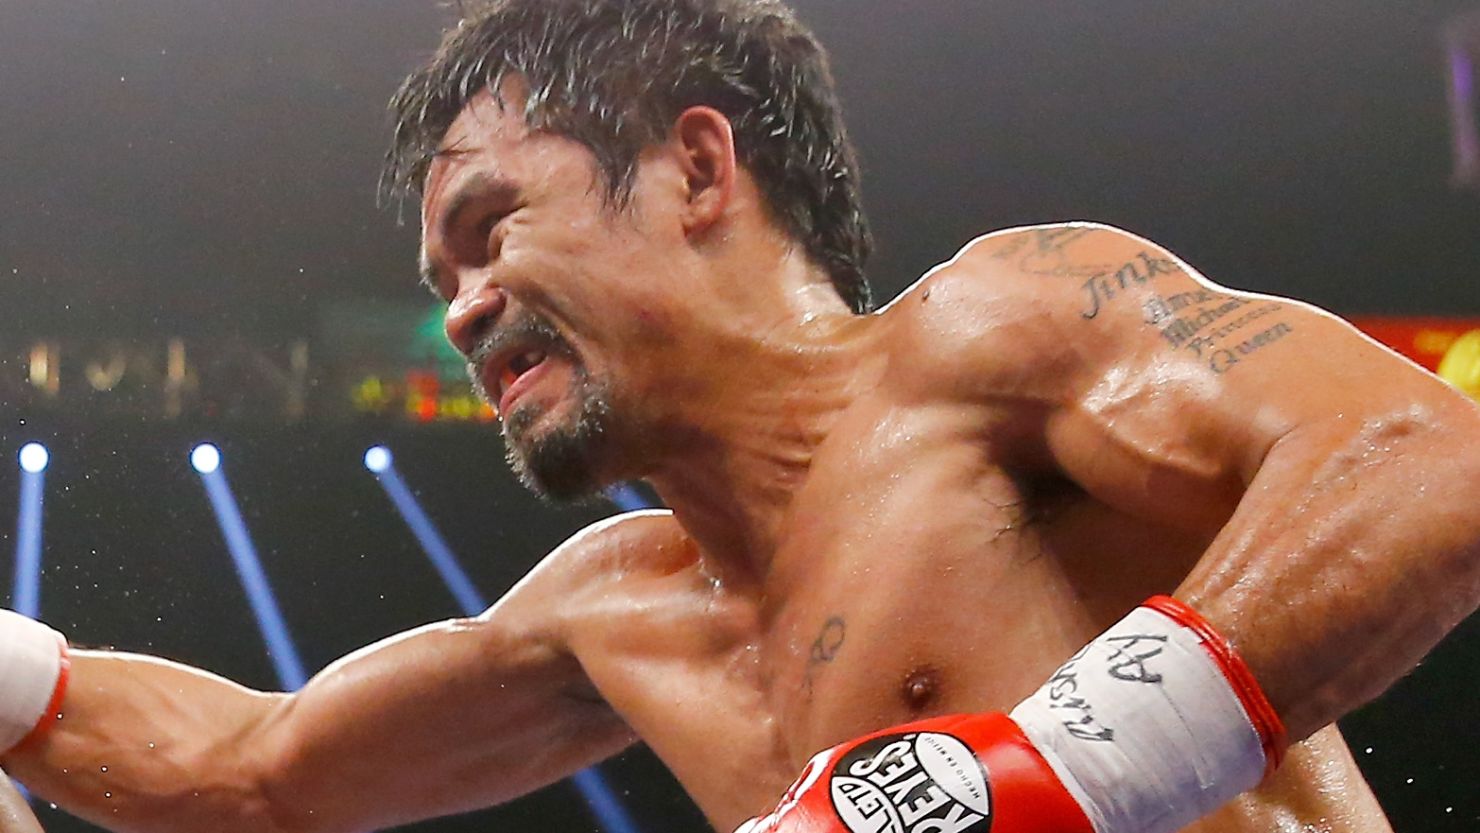 Manny Pacquiao entered his showdown against Floyd Mayweather Jr. with a right shoulder injury